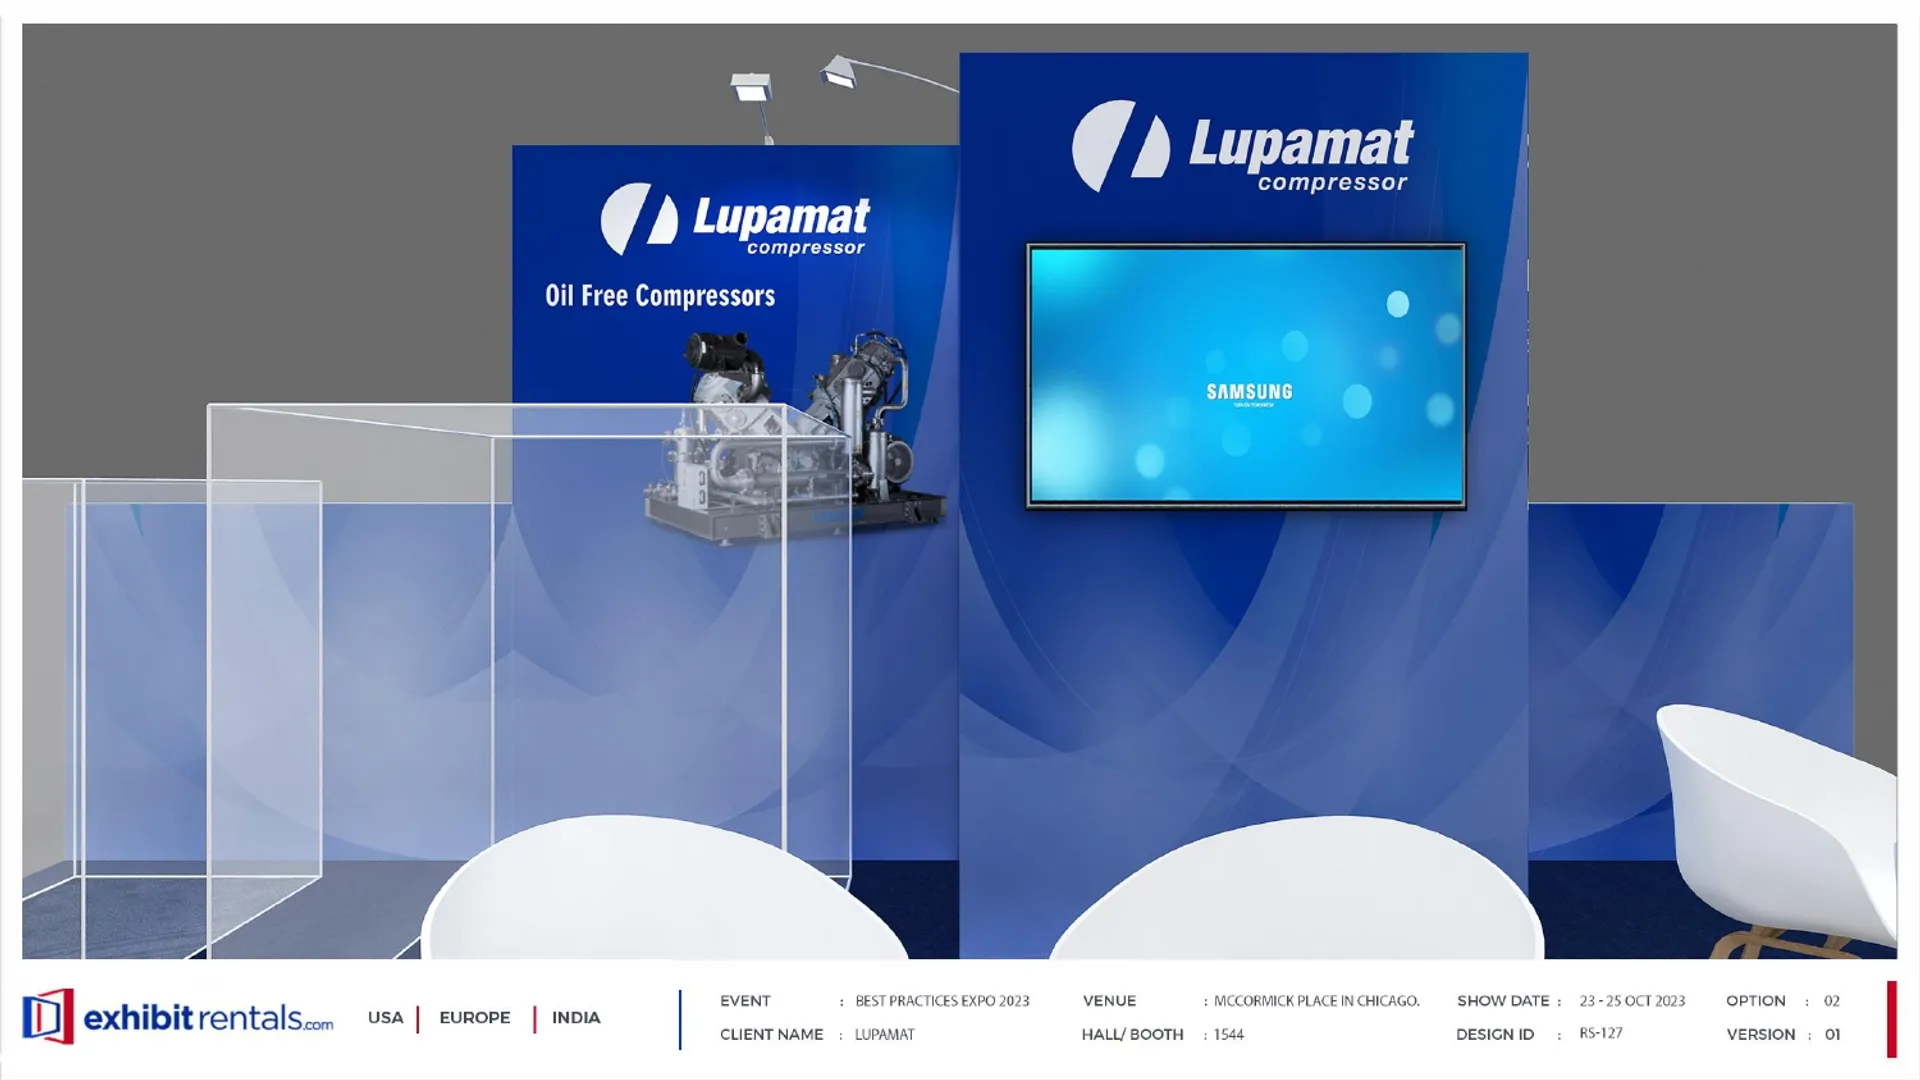 booth-design-projects/Exhibit-Rentals/2024-04-18-40x40-PENINSULA-Project-99/2.1_Lupamat_Best practices expo_ER design proposal-17_page-0001-eqvrd8.jpg